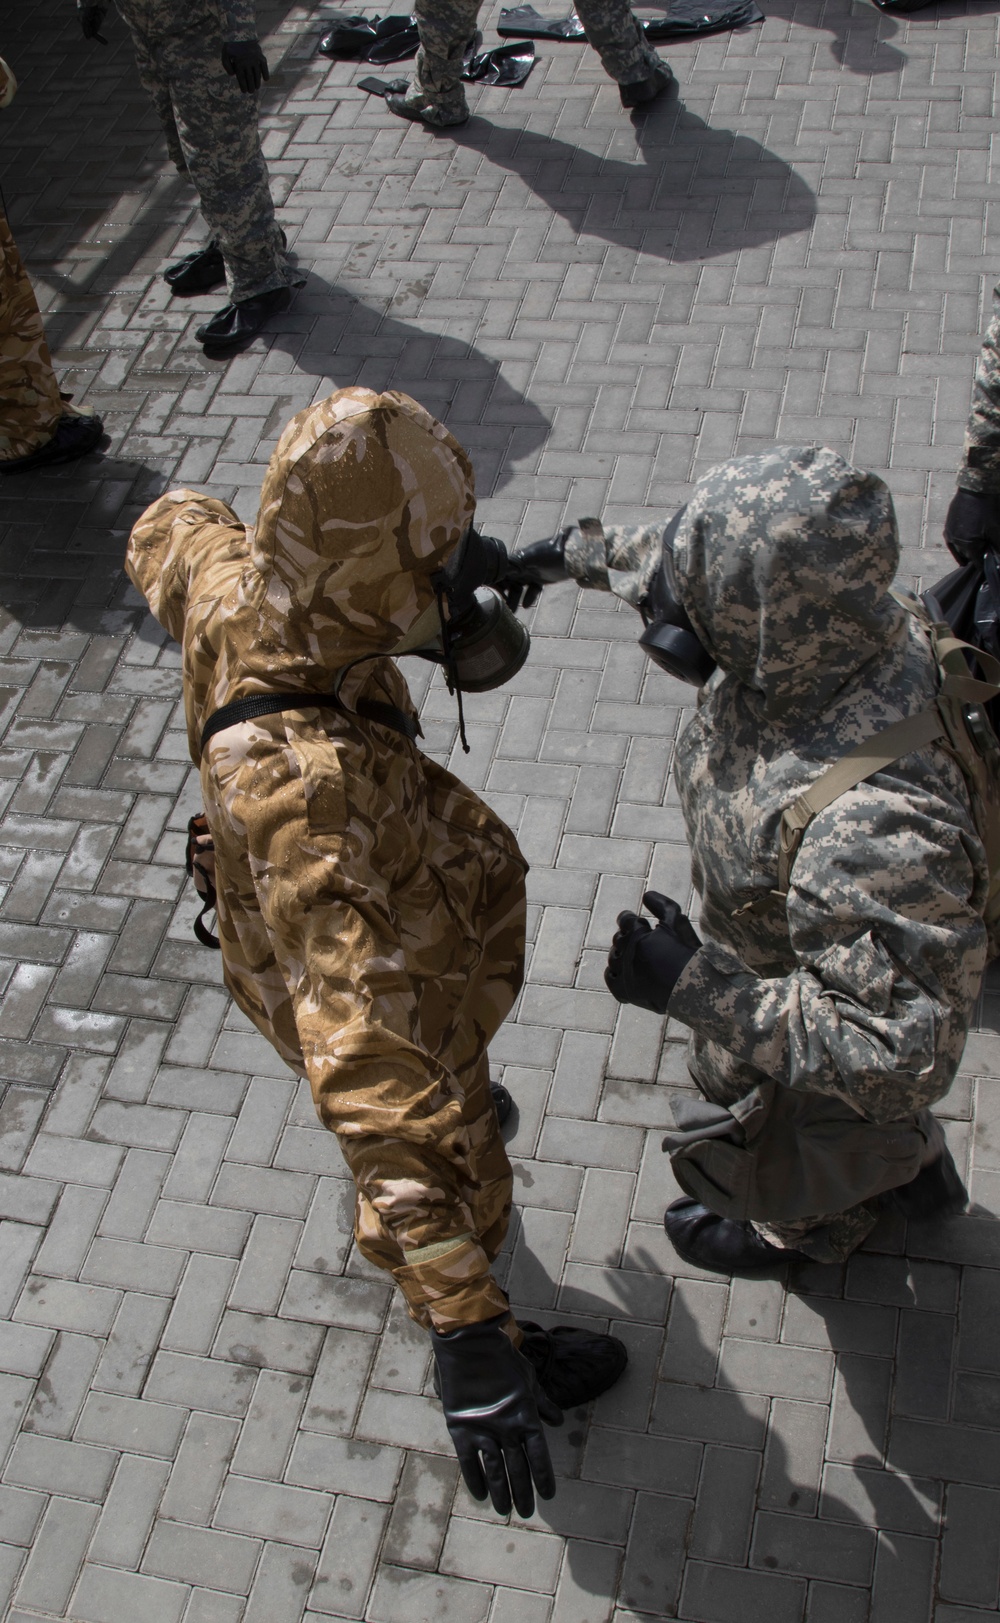 U.S. Army Soldiers decontaminate a Qatari soldier in a simulated crisis during IS 21